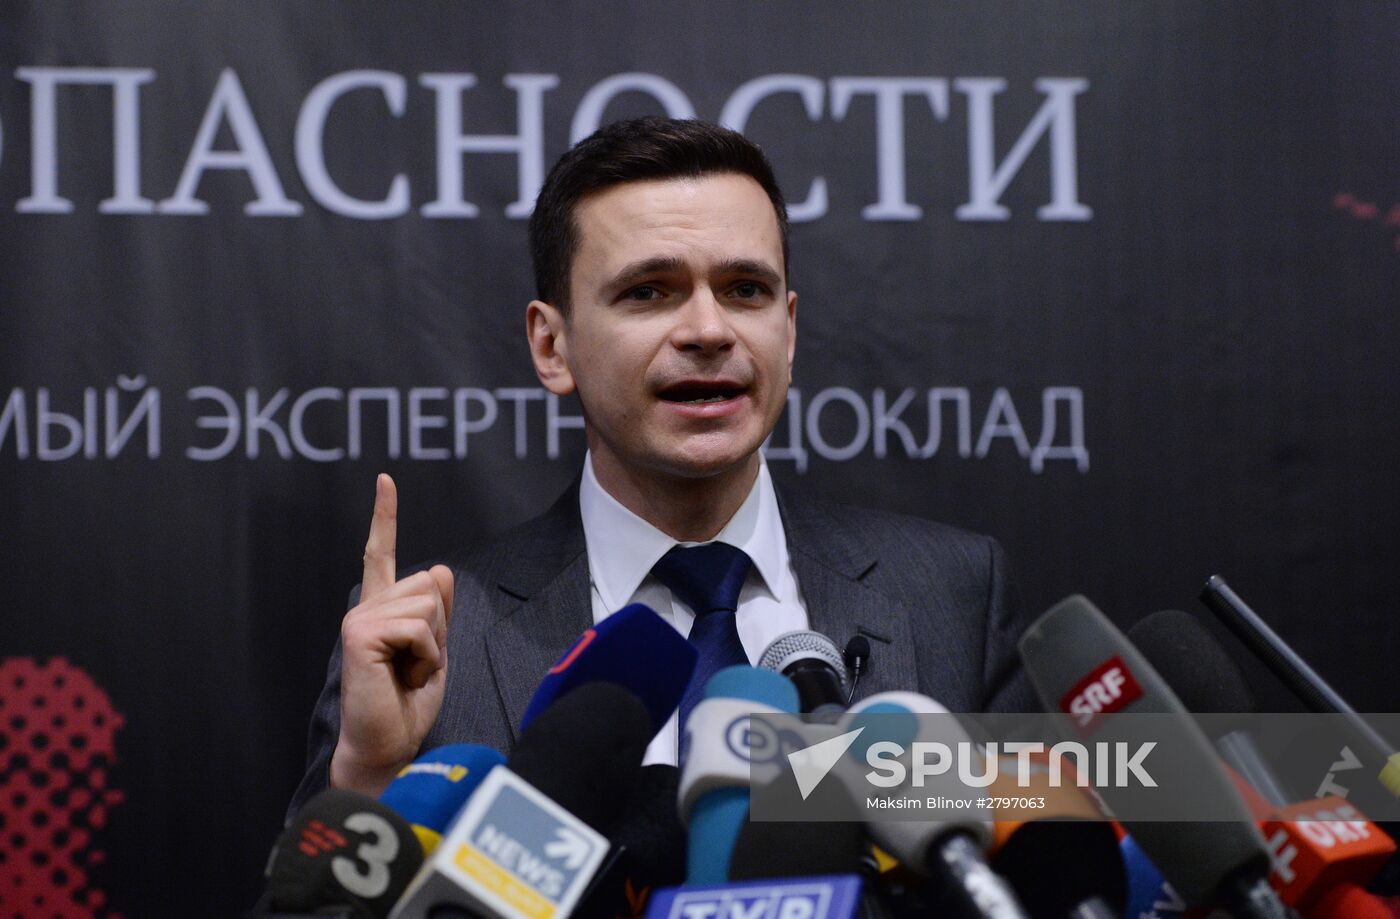 Deputy Chairman of PARNAS Party Ilya Yashin presents report "A Threat to National Security"